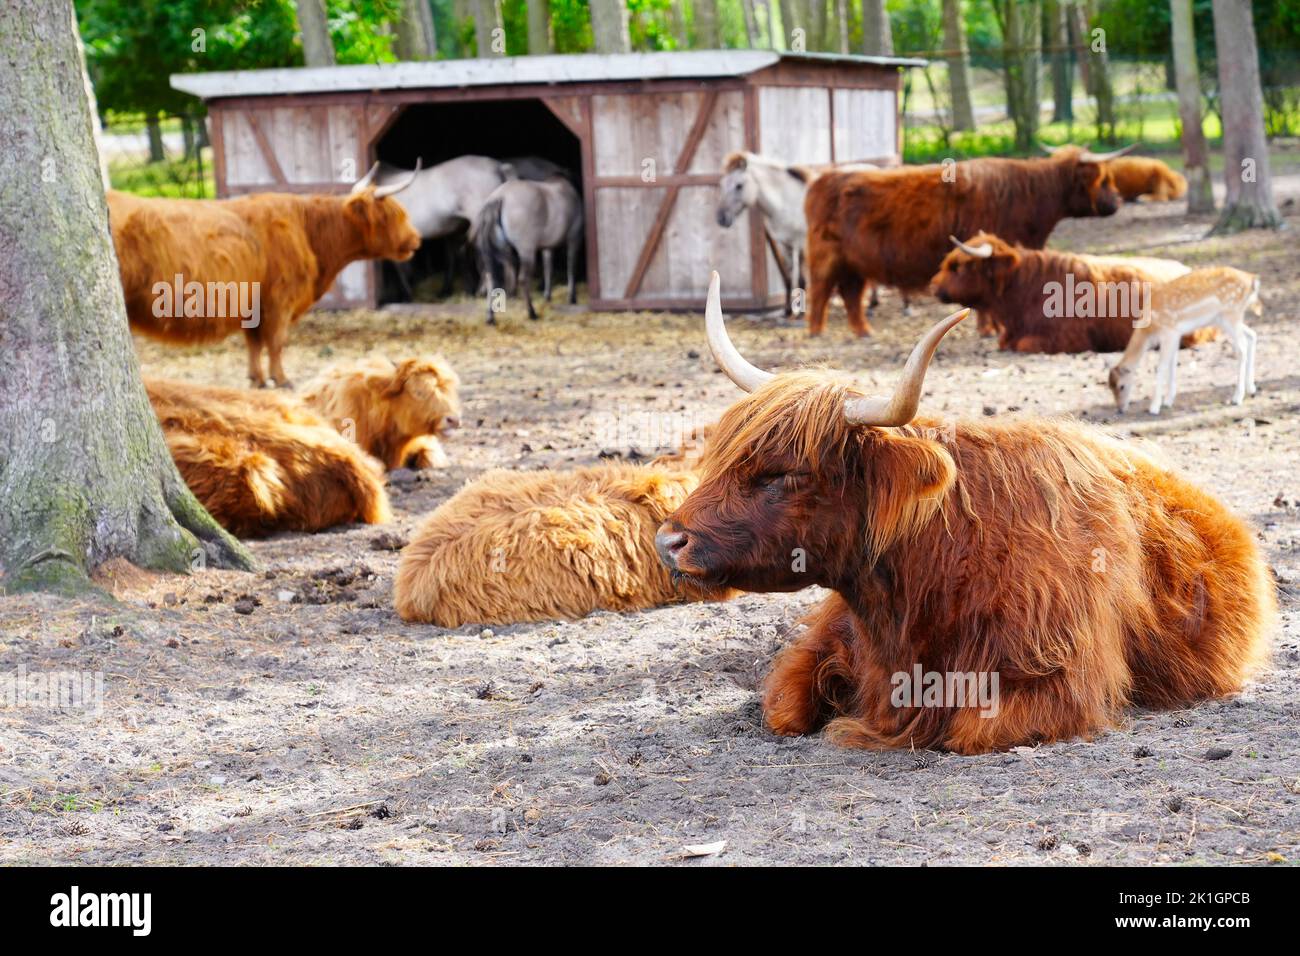 Highlands Cow, long furred or haired, ginger coloured Scottish Highland cattle on the hill Stock Photo